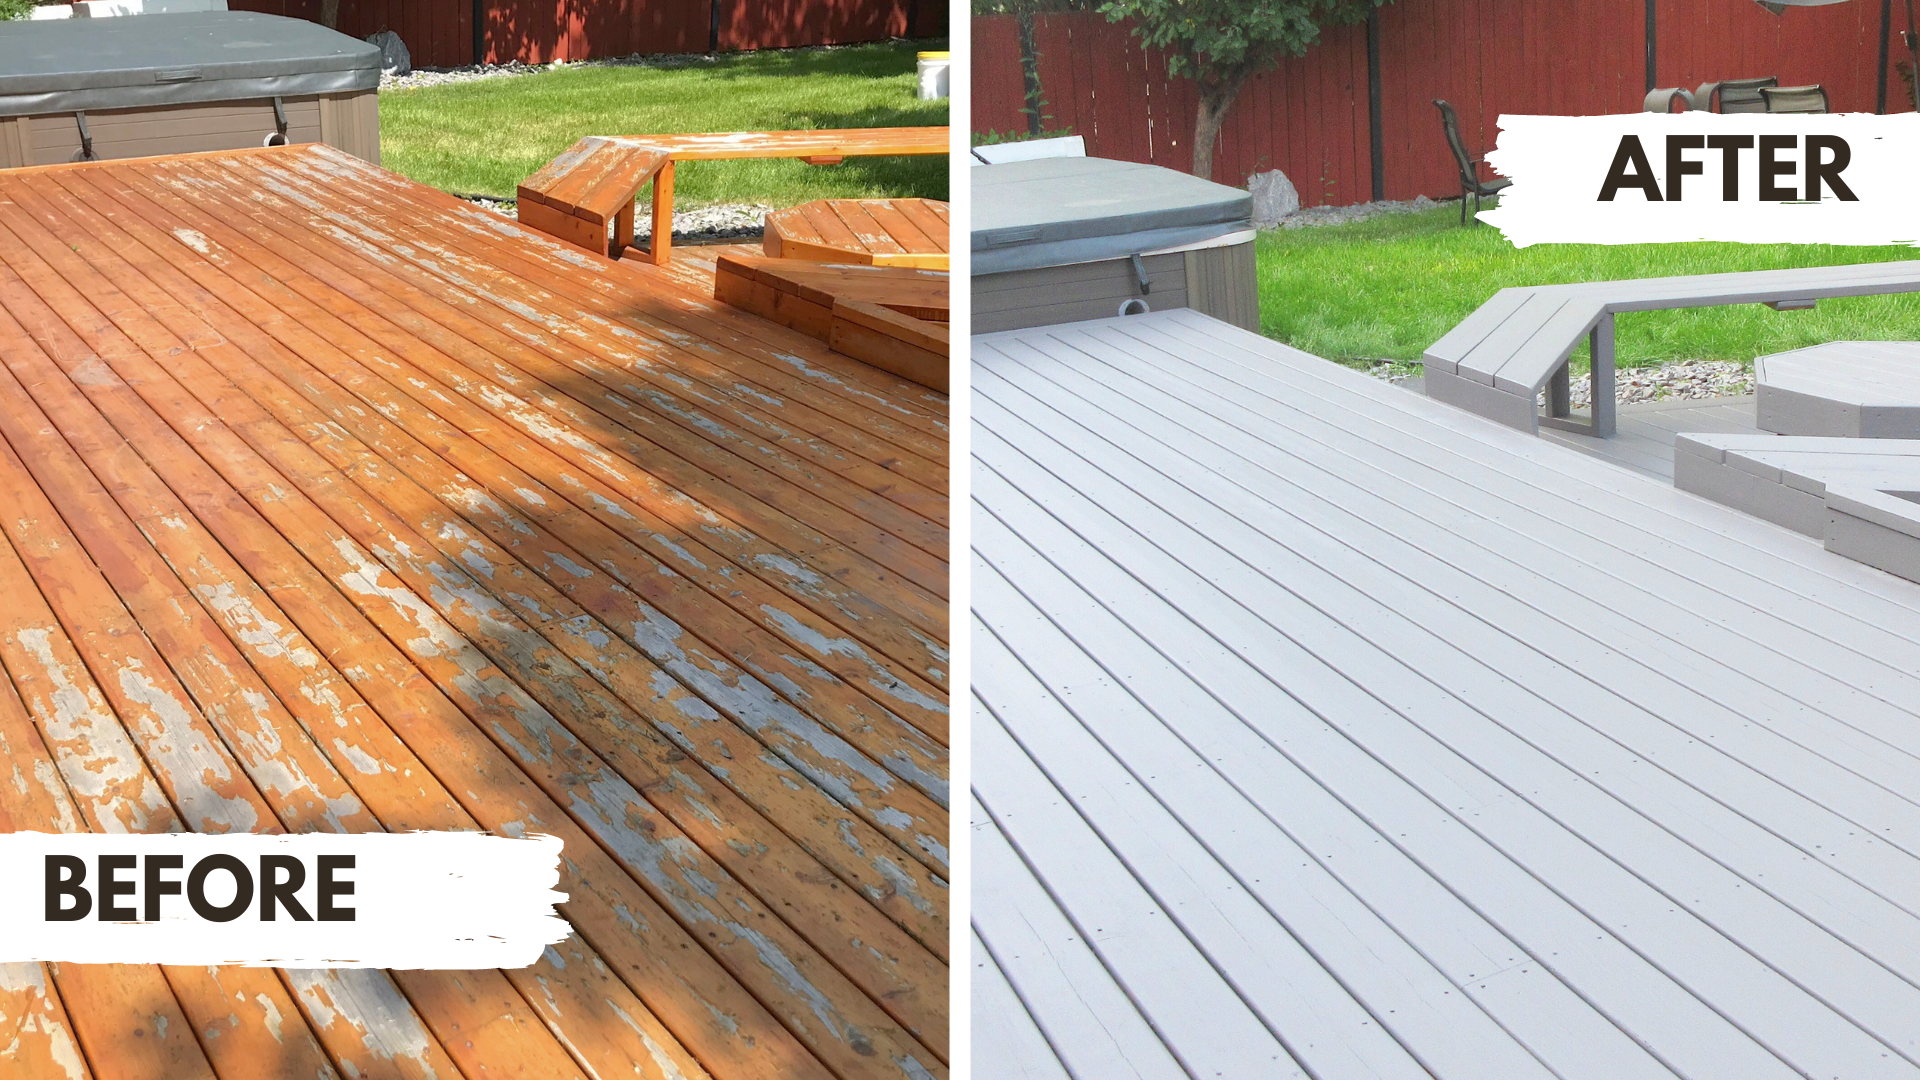 From ugly paint chipped deck to a nice clean deck with a fresh coat of paint